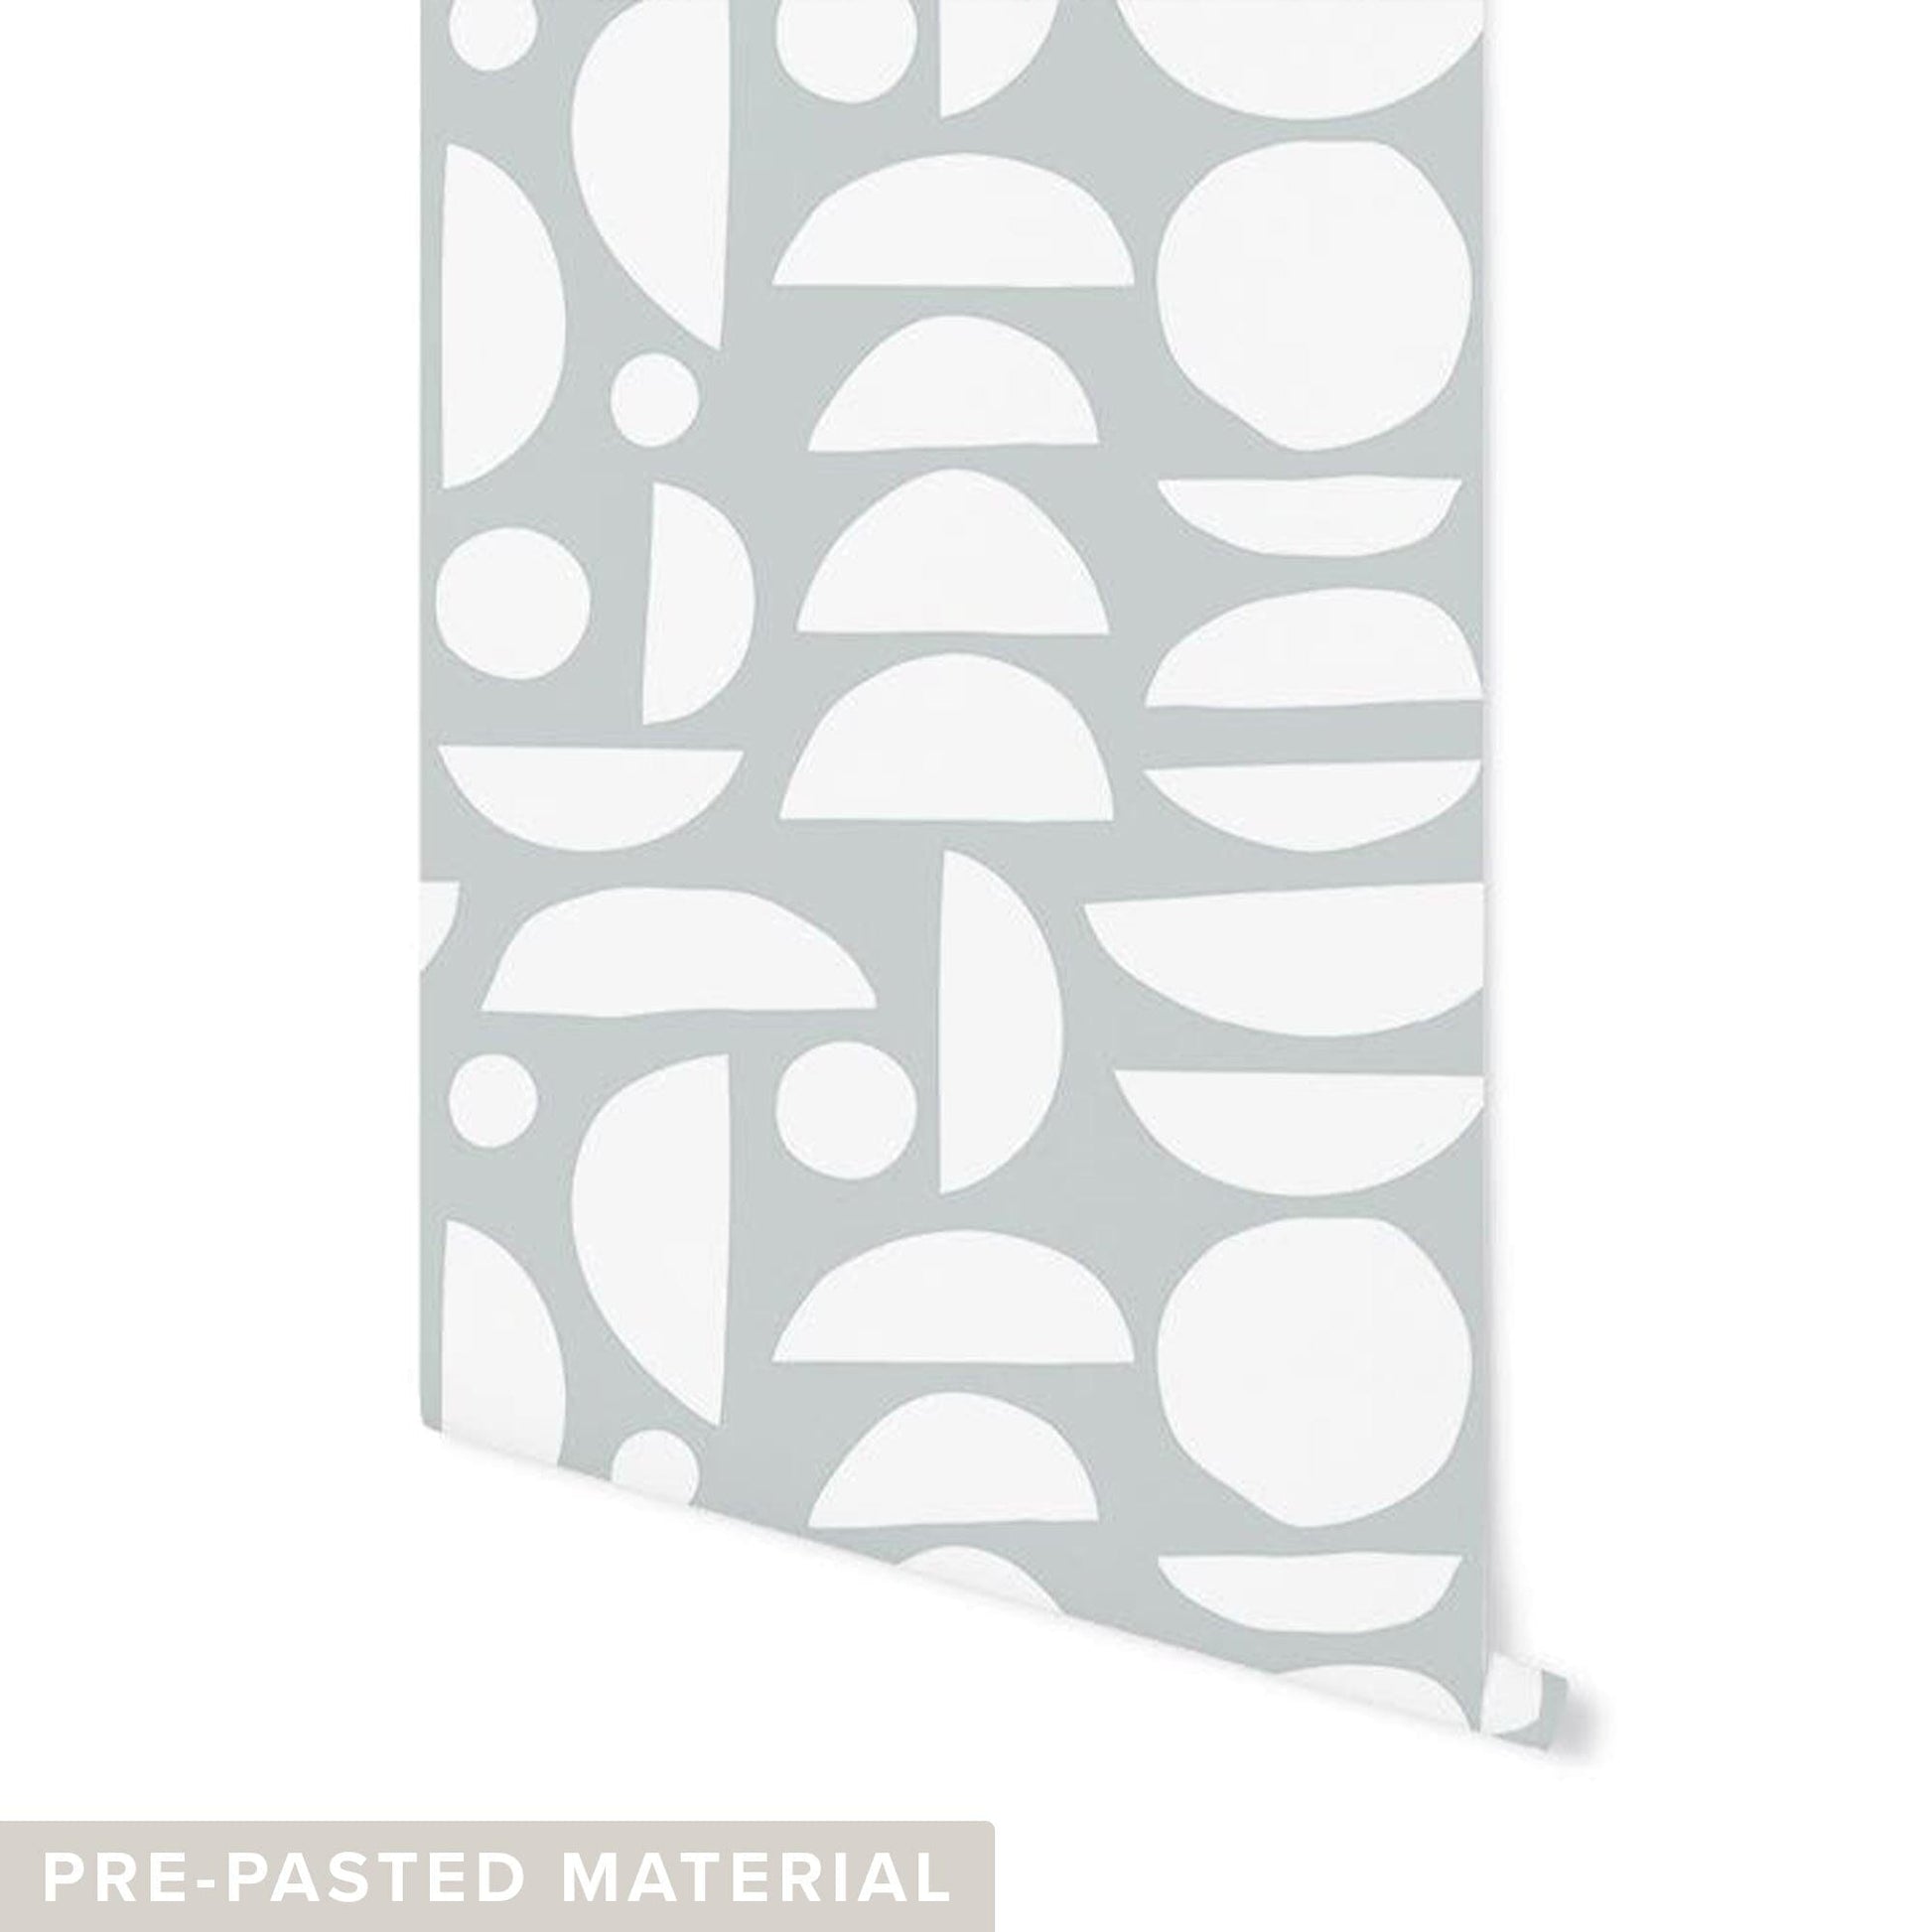 Tundra Wallpaper Wallpaper Urbanwalls Pre-pasted DOUBLE ROLL : 46" X 4 FEET Grey